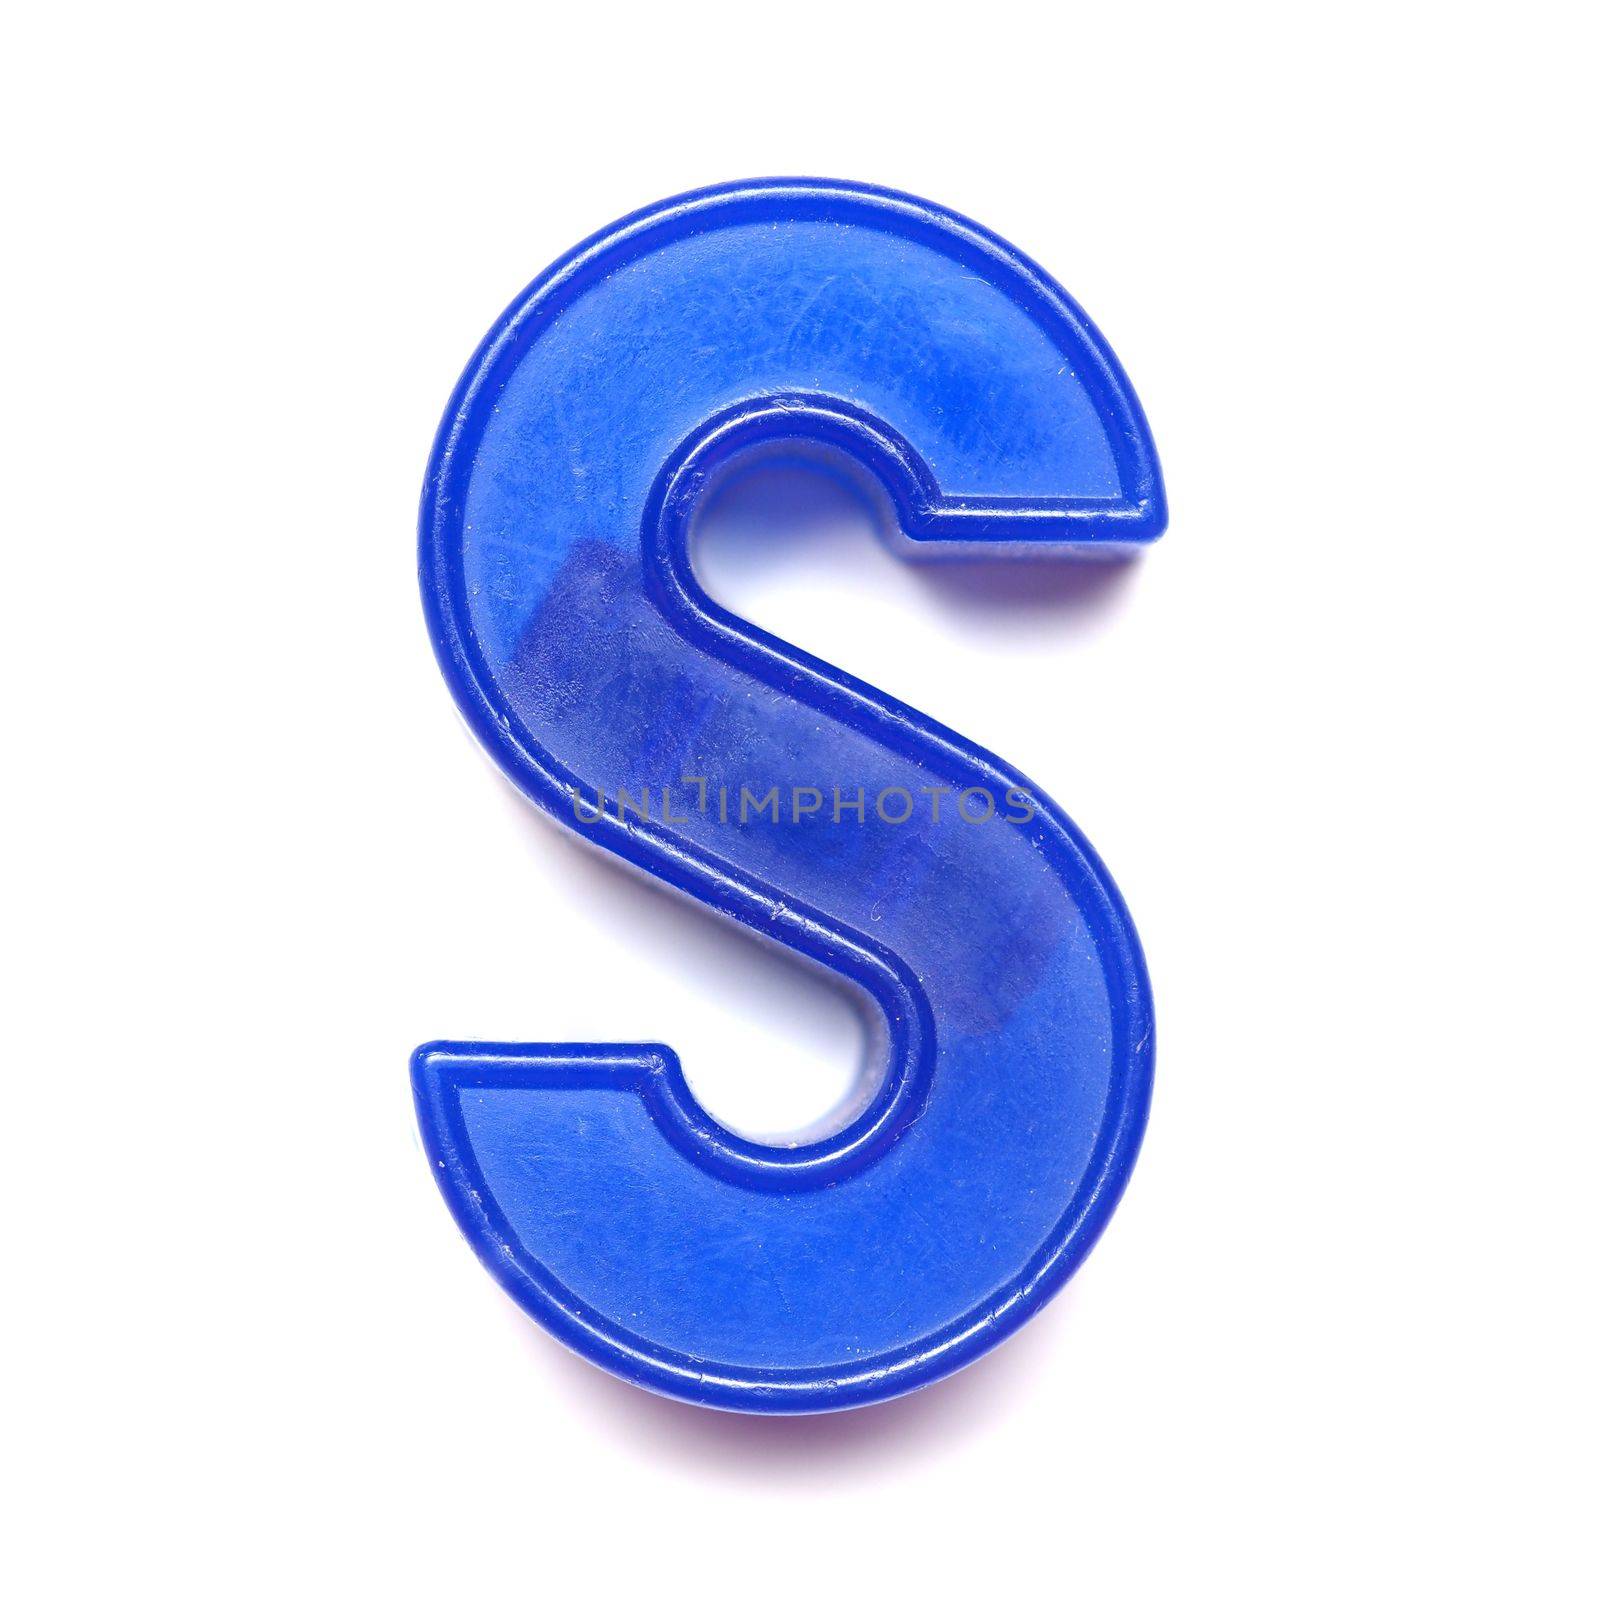 Magnetic uppercase letter S of the British alphabet